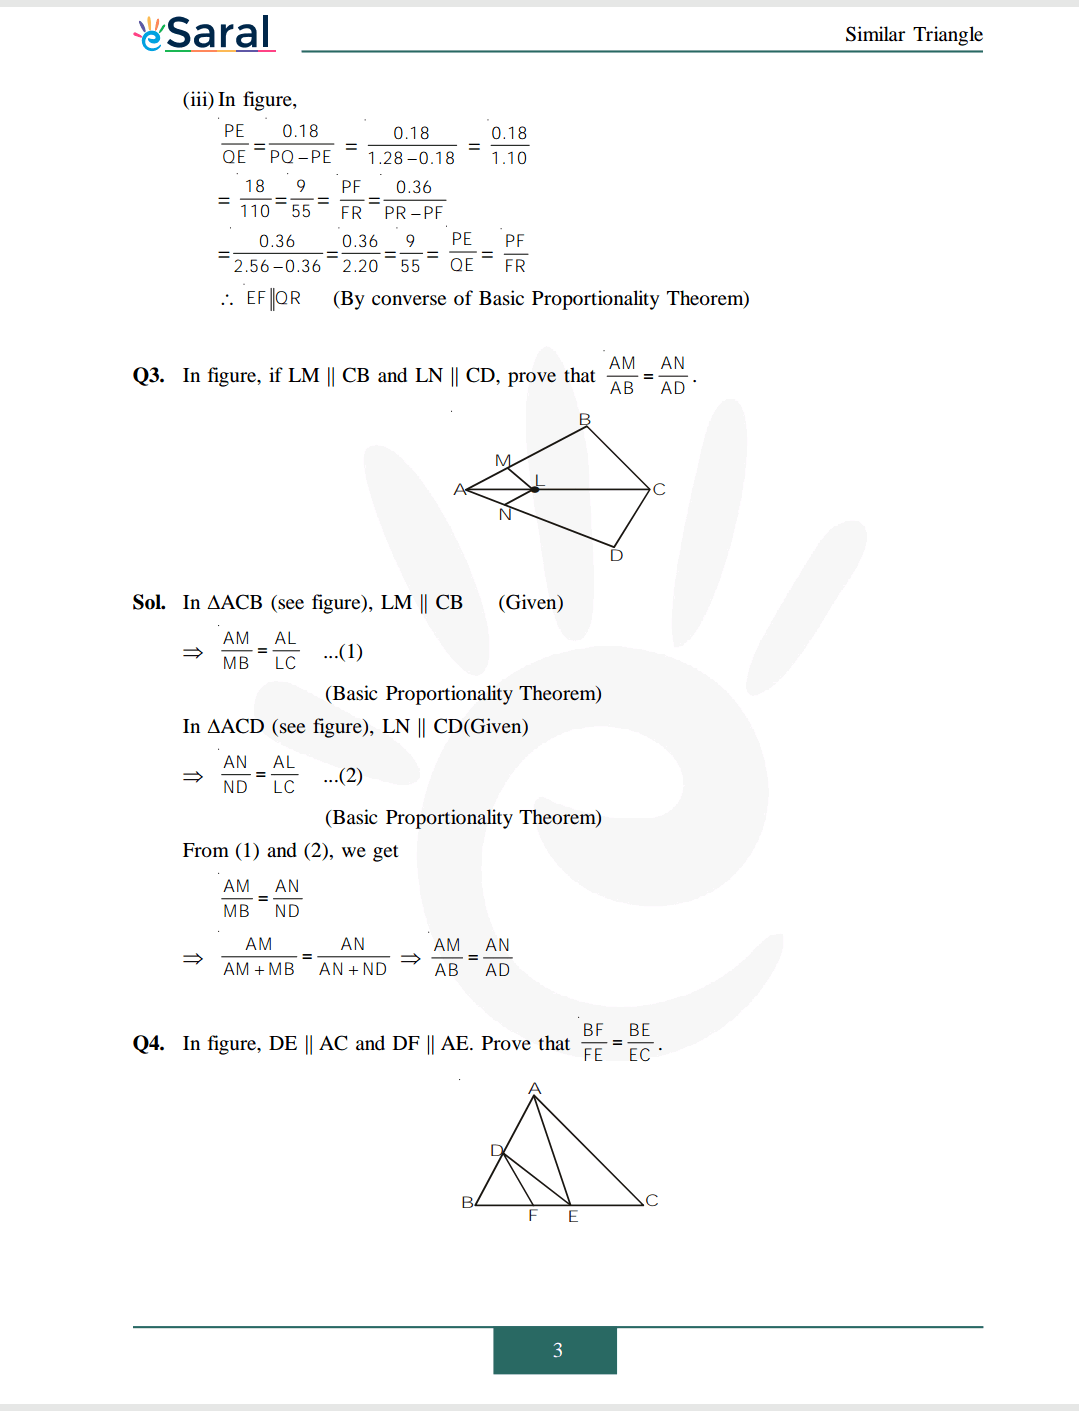 Class 10 Maths Chapter 6 exercise 6.2 solutions Image 2